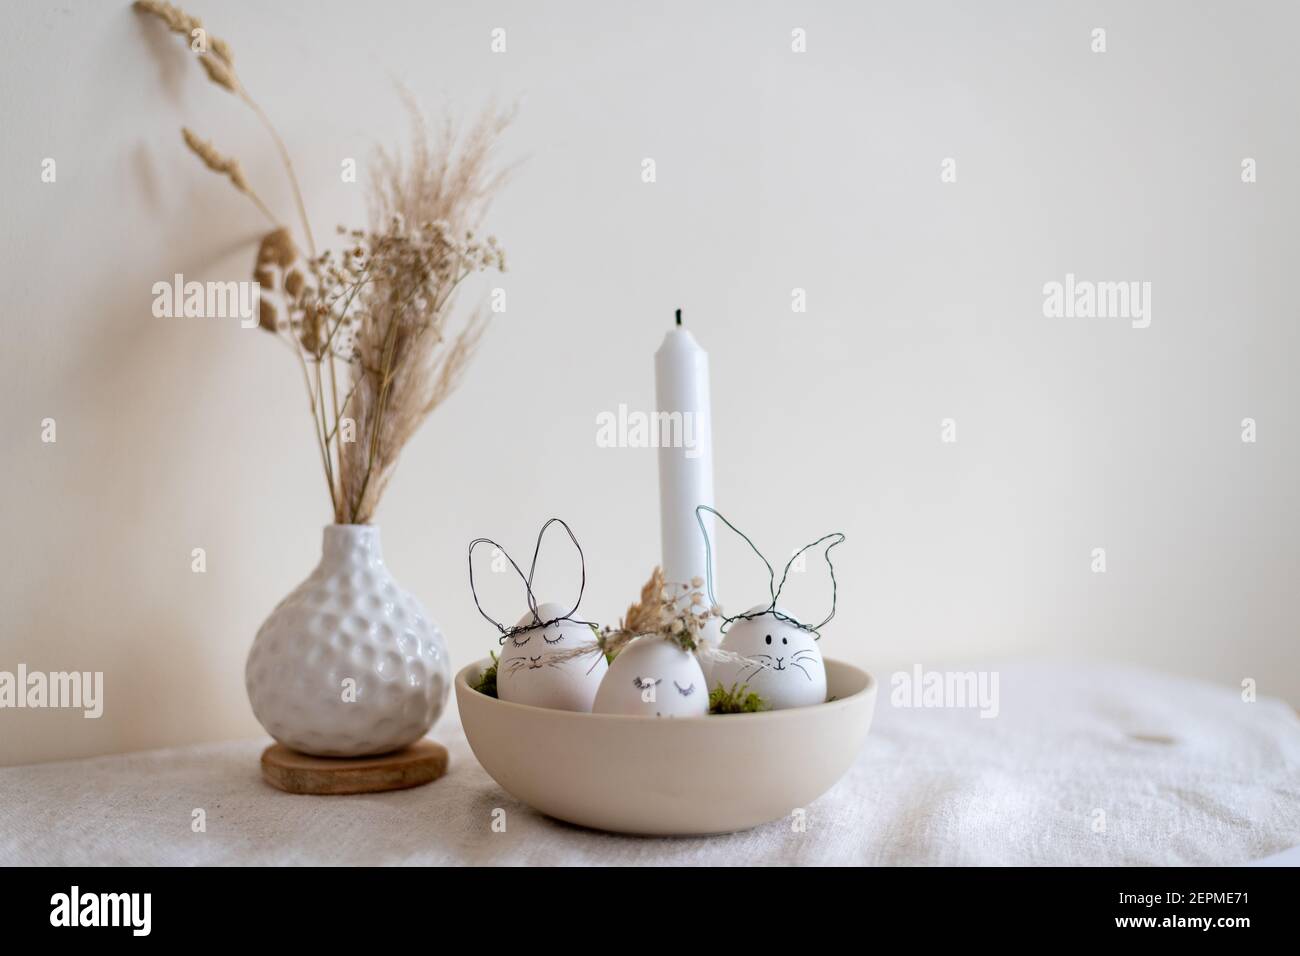 3 eggs as decoration for Easter, 2 as bunnies one as a girl with a flower wreath in a bowl. Happy Easter. Stock Photo